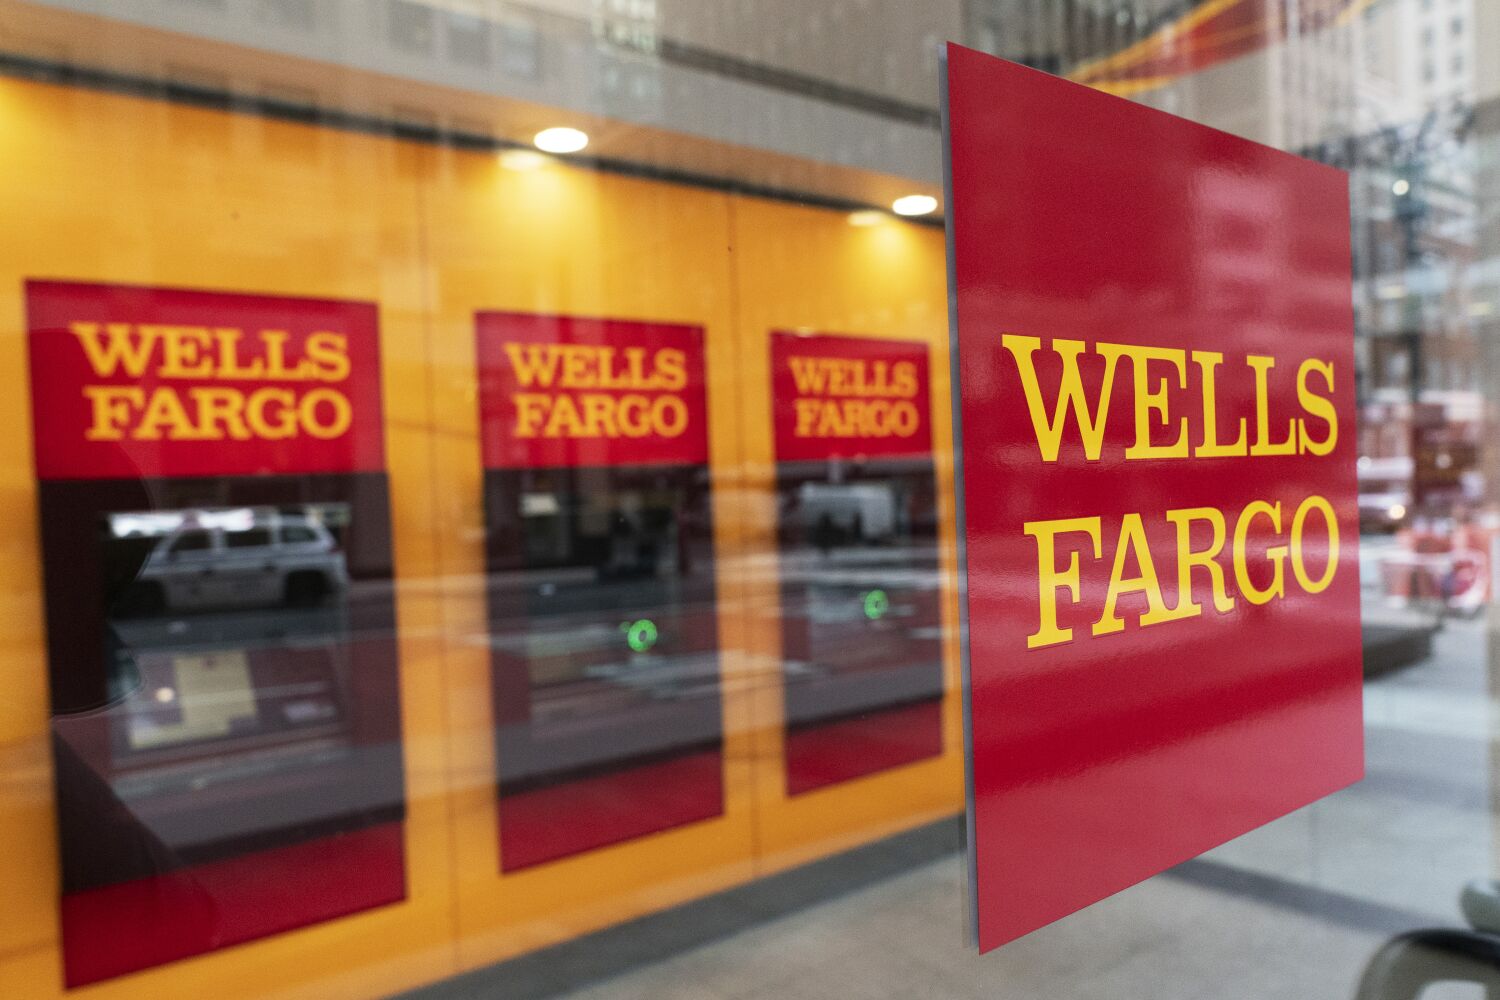 Executive sues Wells Fargo for inaction on sexual misconduct